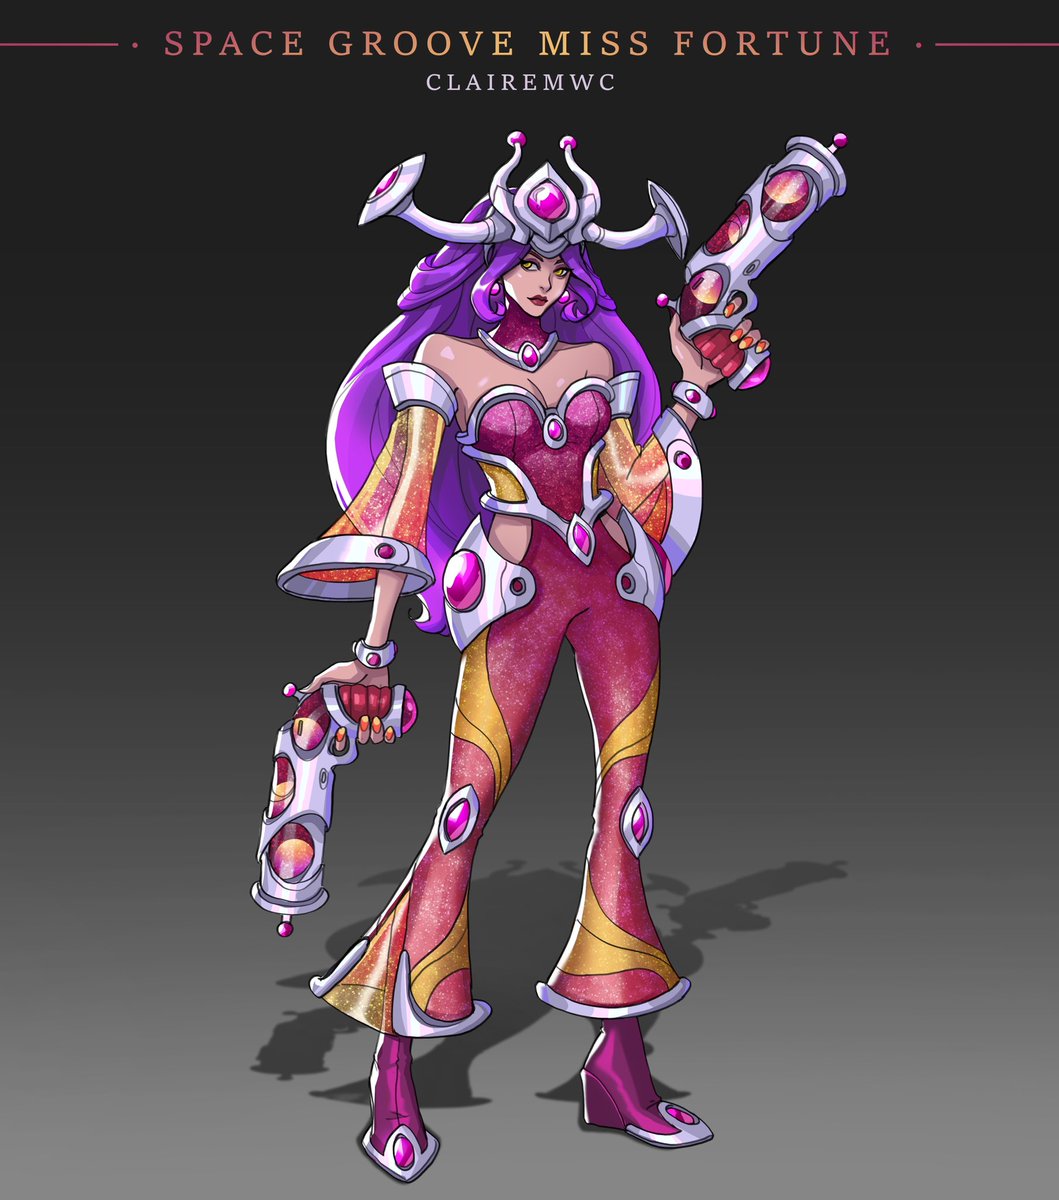 #skintober Day 11: Space Groove Miss Fortune 

#LeagueOfLegends #missfortune #spacegroove #skinconcept